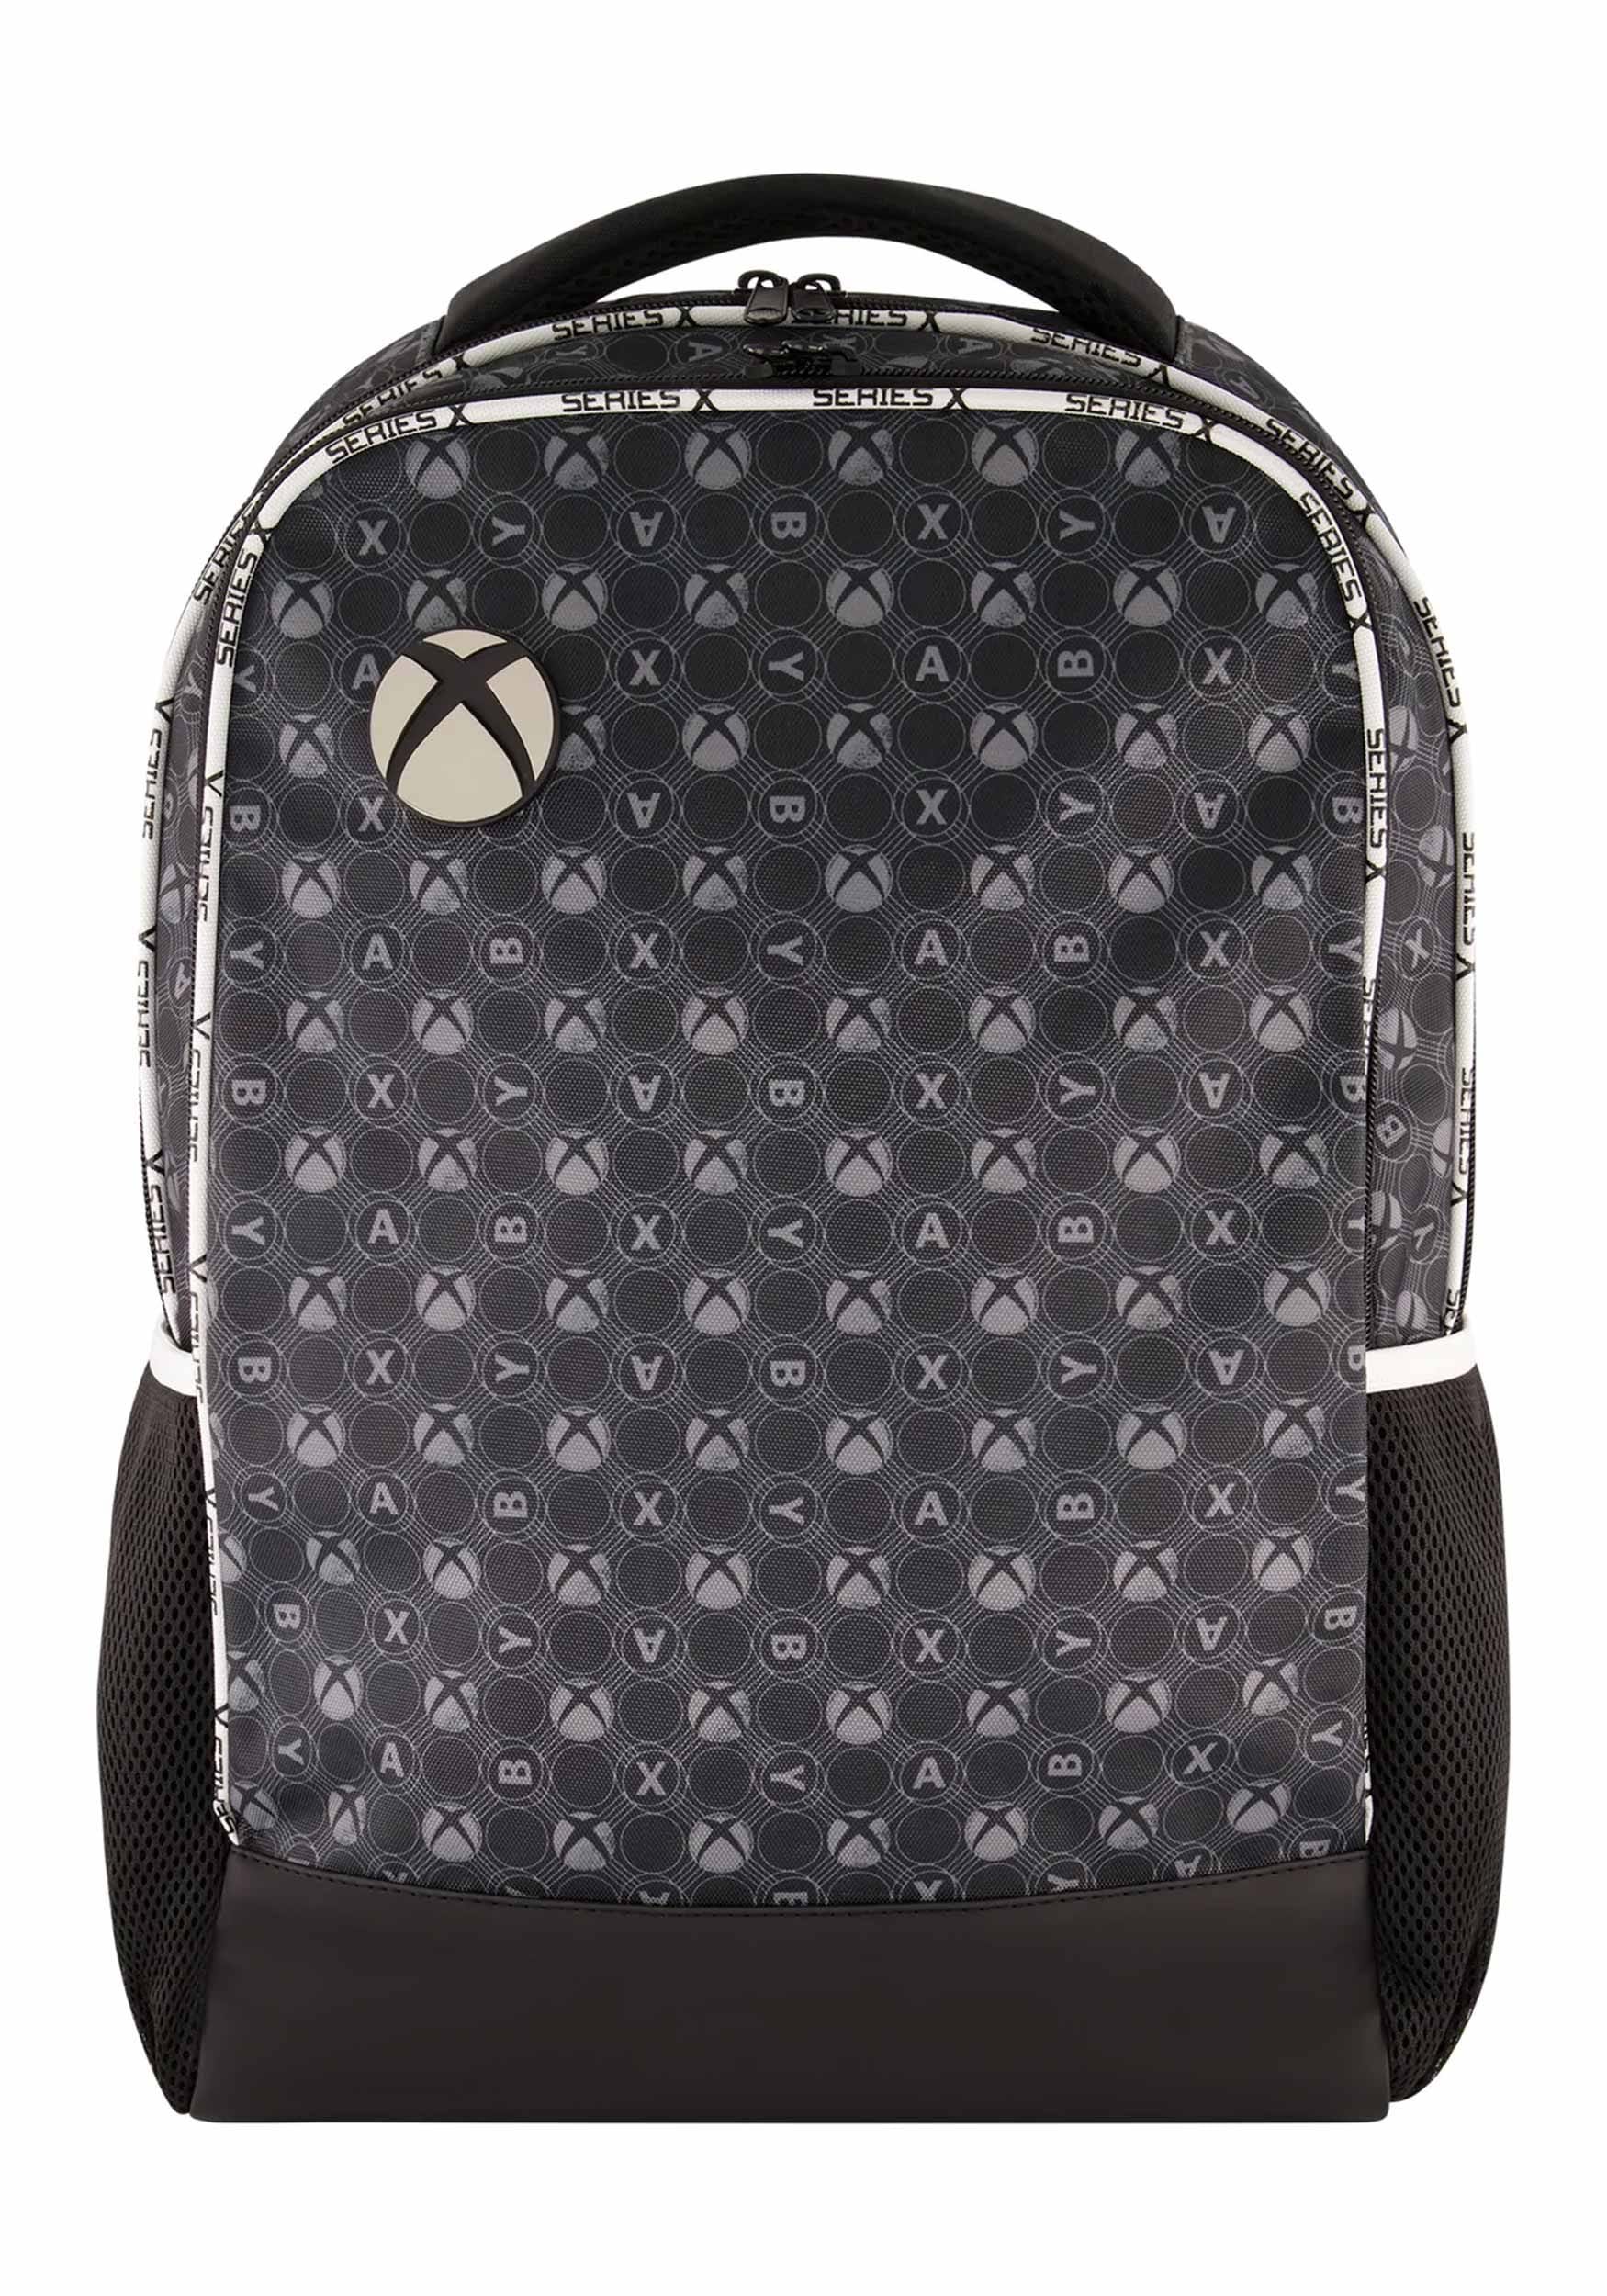 Xbox All Black Geometric Series X Backpack For Adults